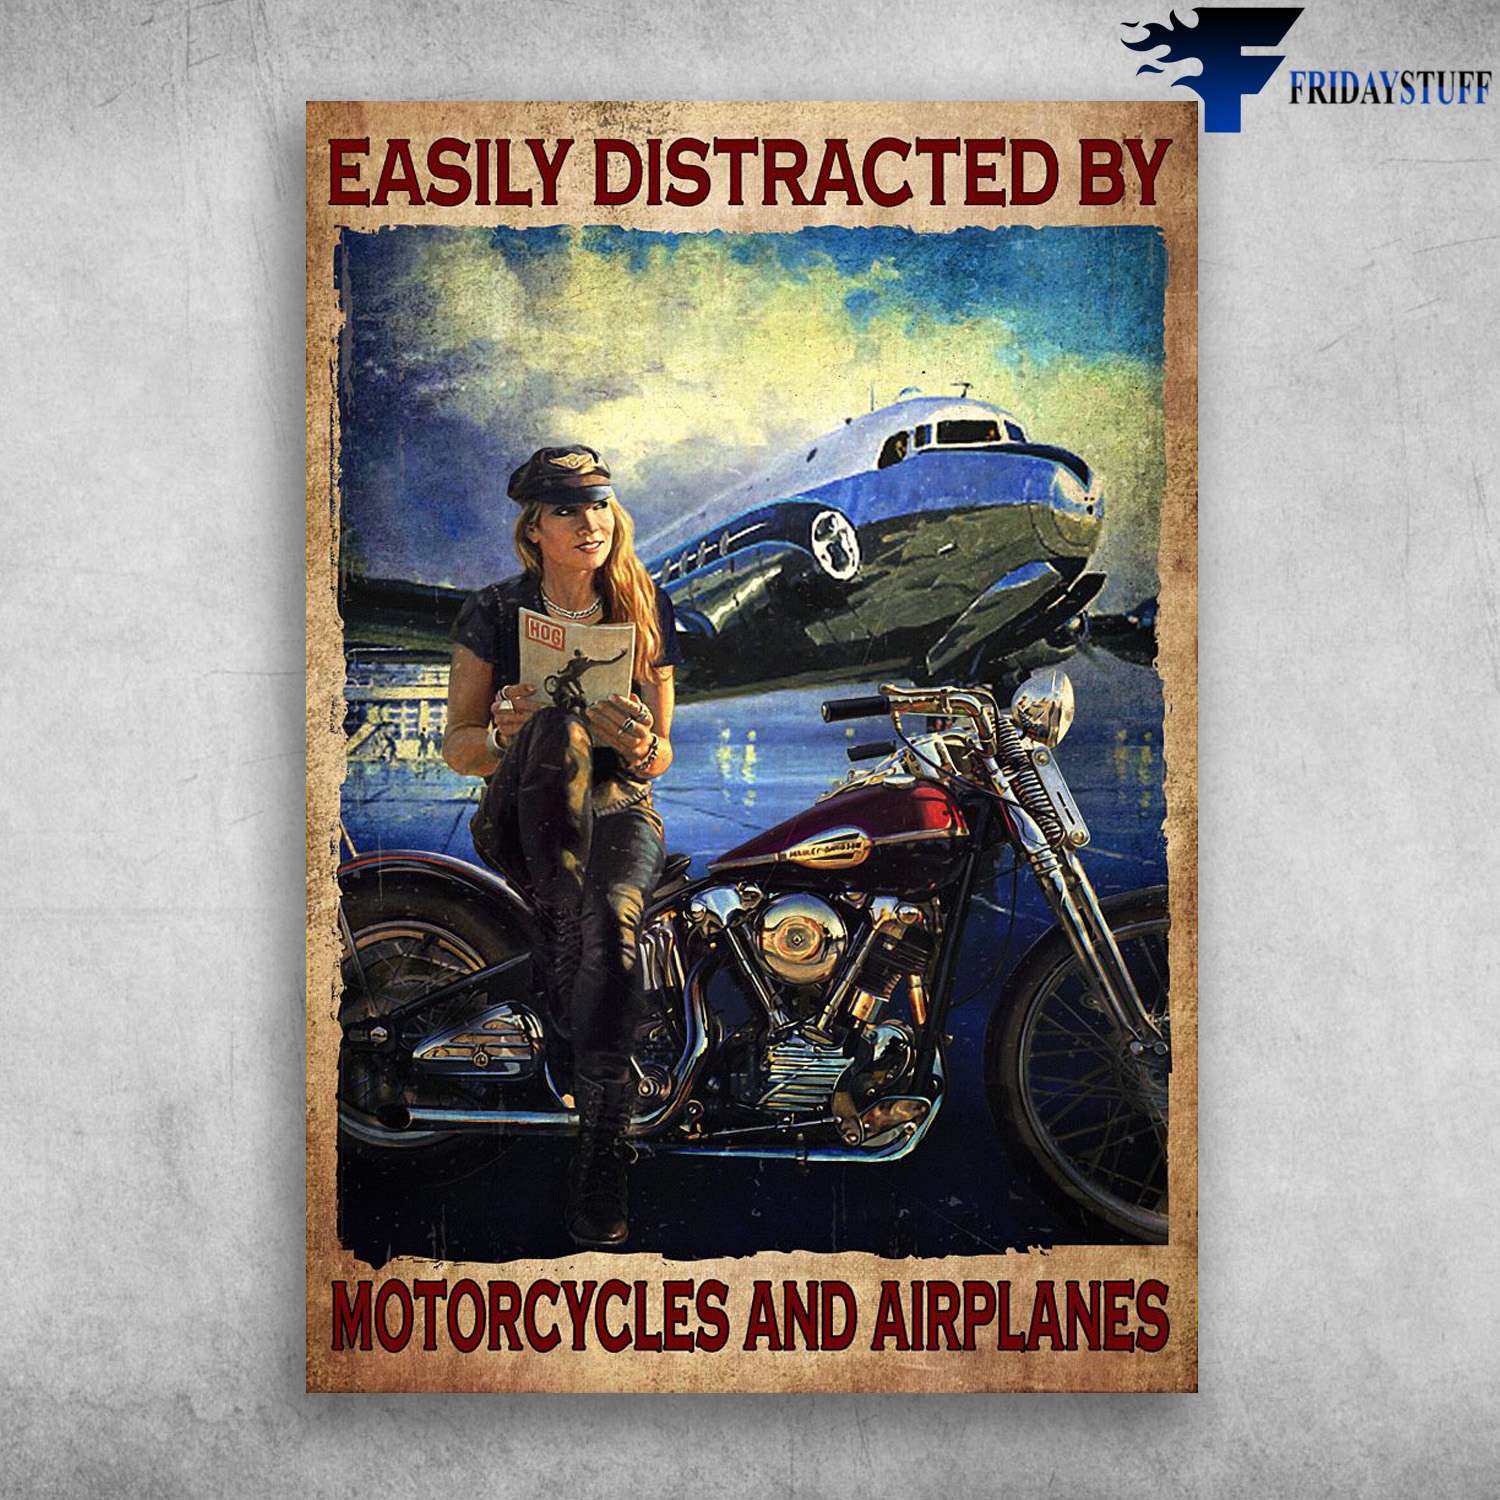 Lady Racing, Biker Lover - Easily Distracted By, Motorcycles And Airplanes